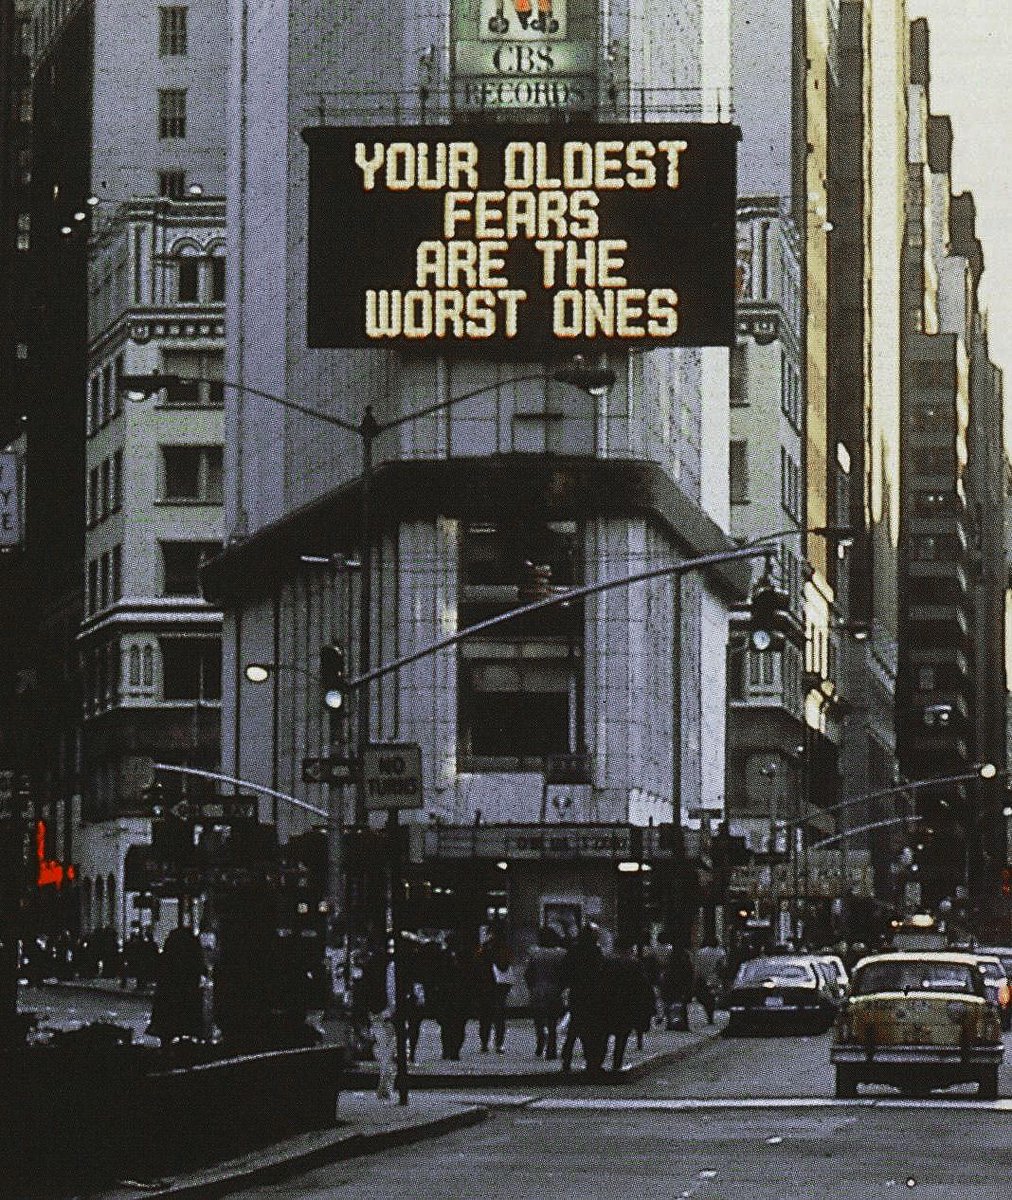 Meanwhile in psychoanalytic billboard art...

YOUR OLDEST FEARS ARE THE WORST ONES

Jenny Holzer, Times Square, 1986 https://t.co/njgvH5tBPY